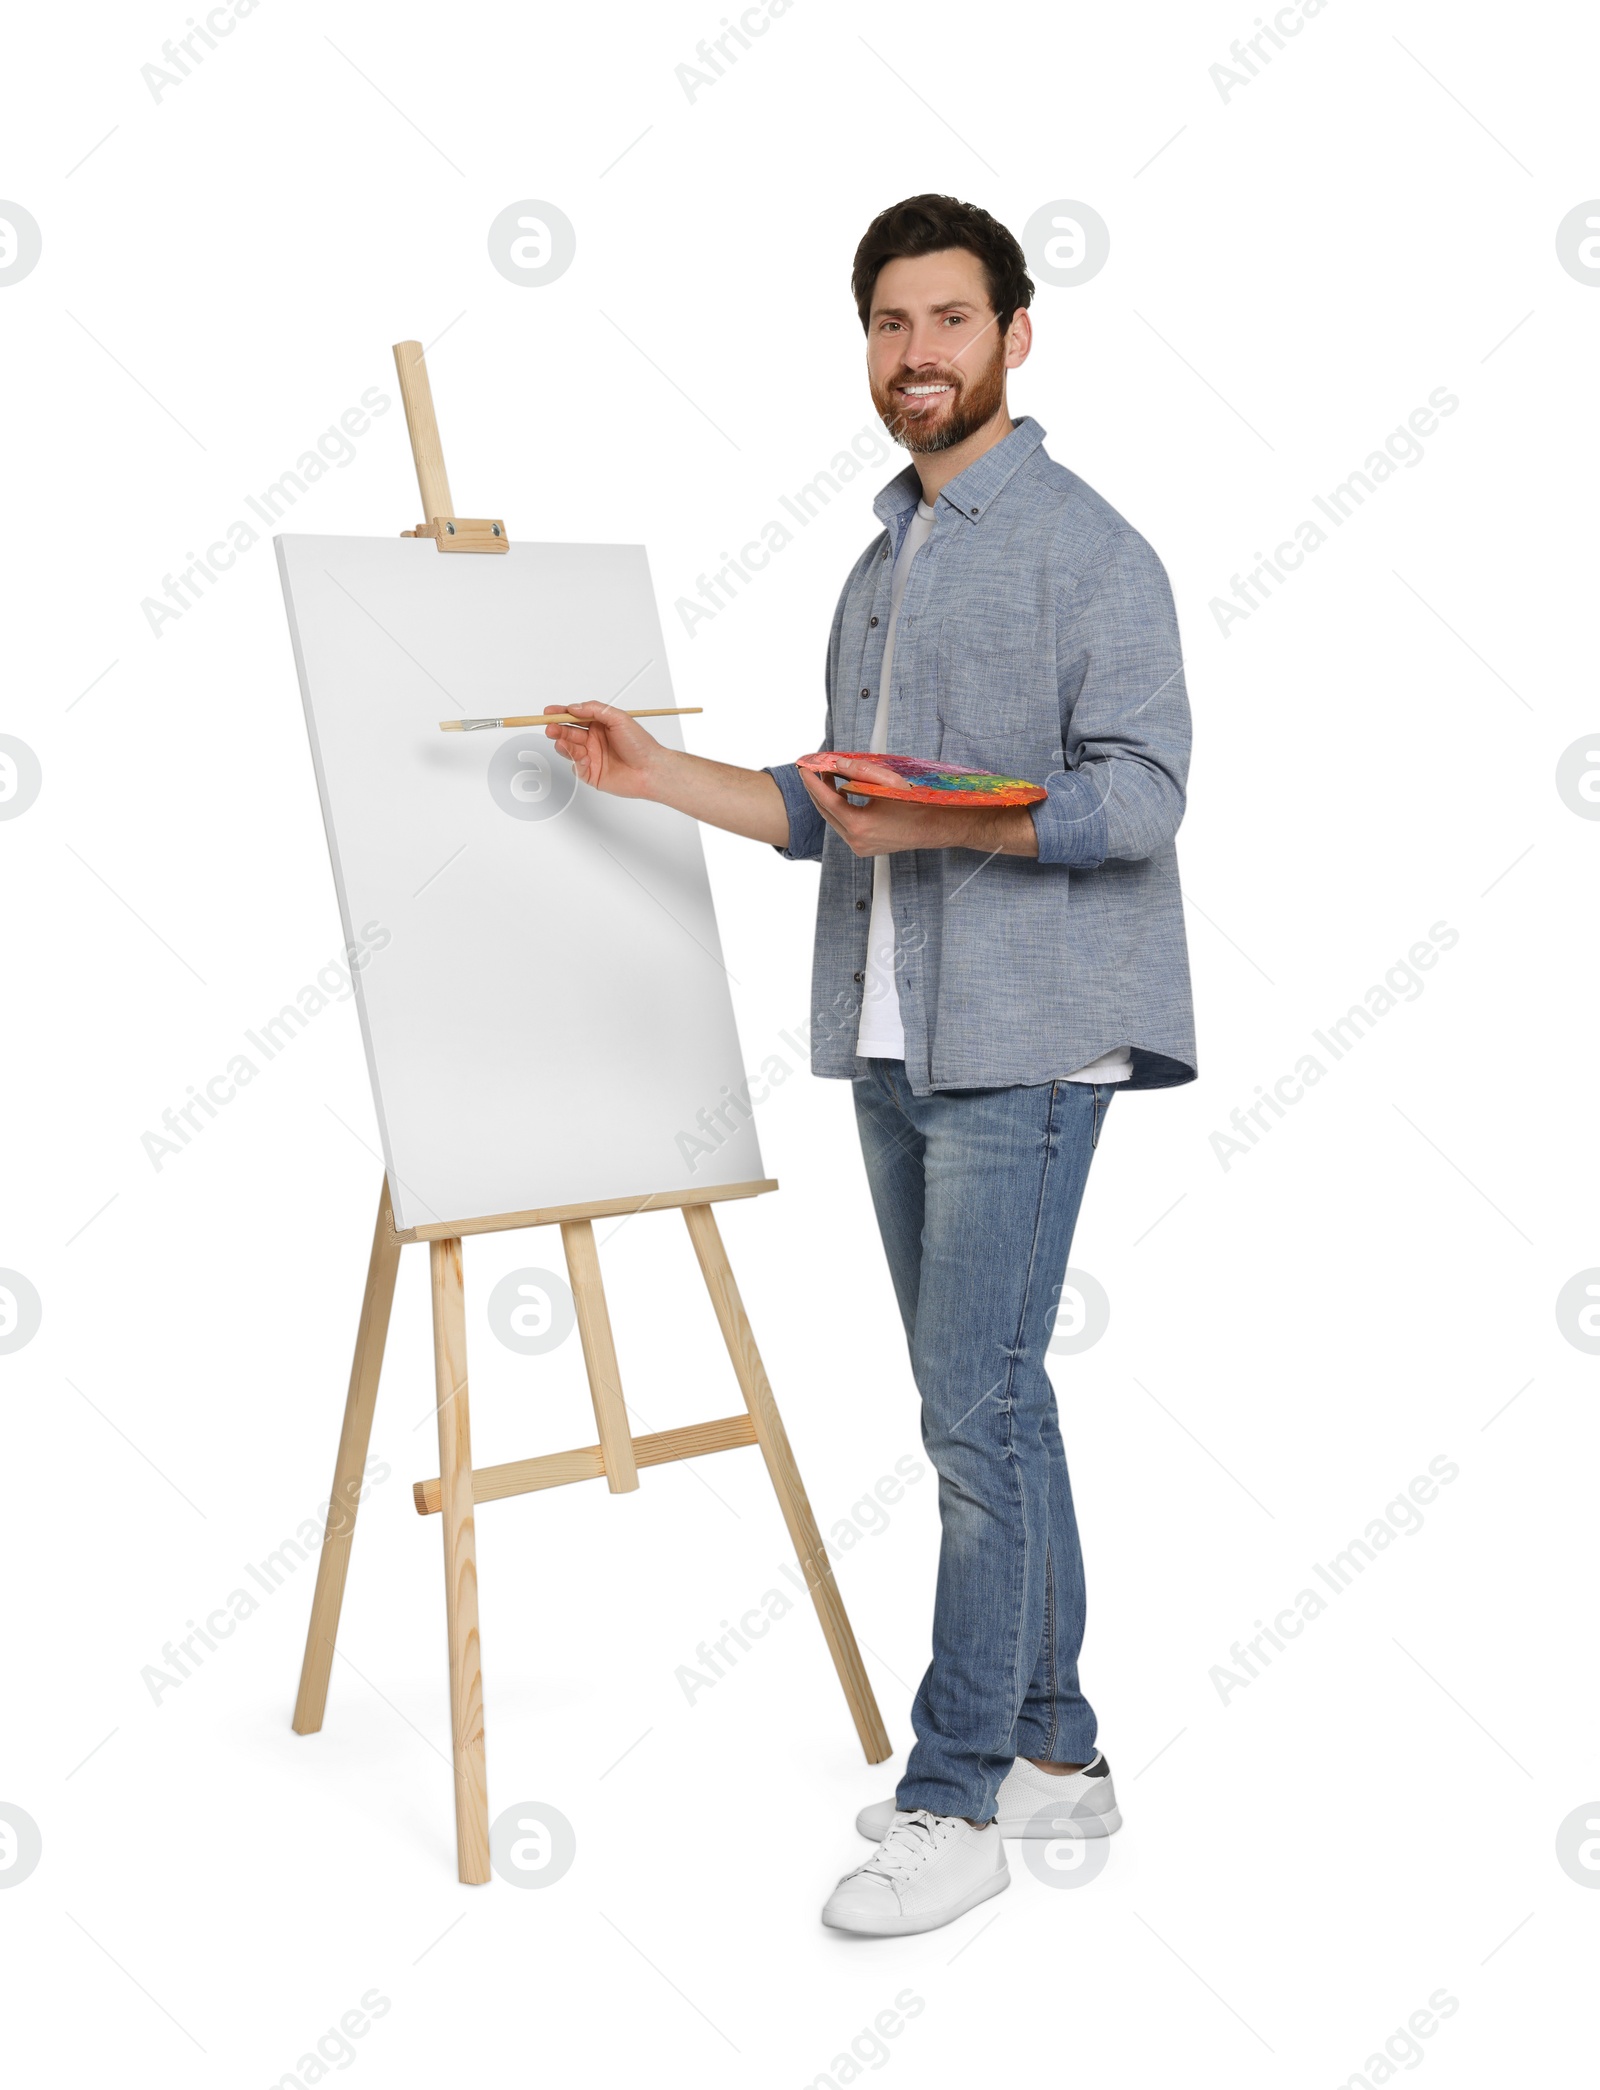 Photo of Happy man with brush painting against white background. Using easel to hold canvas